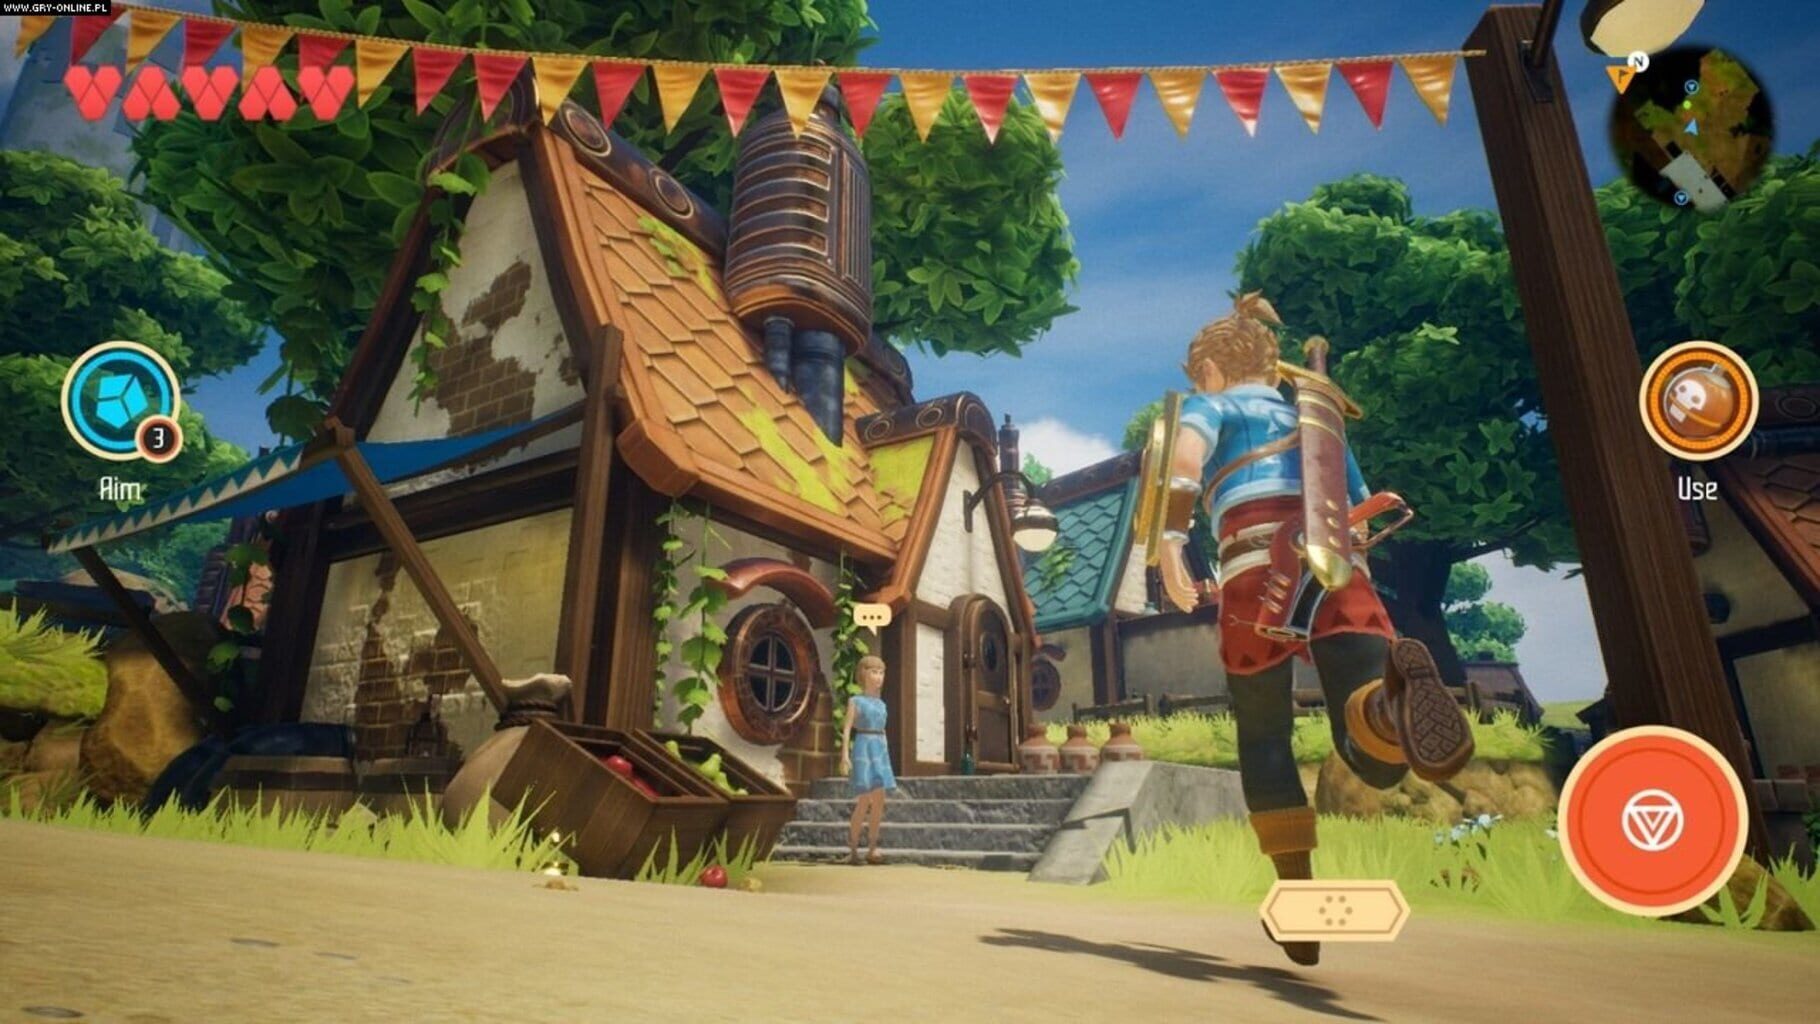 Oceanhorn 2: Knights of the Lost Realm screenshots